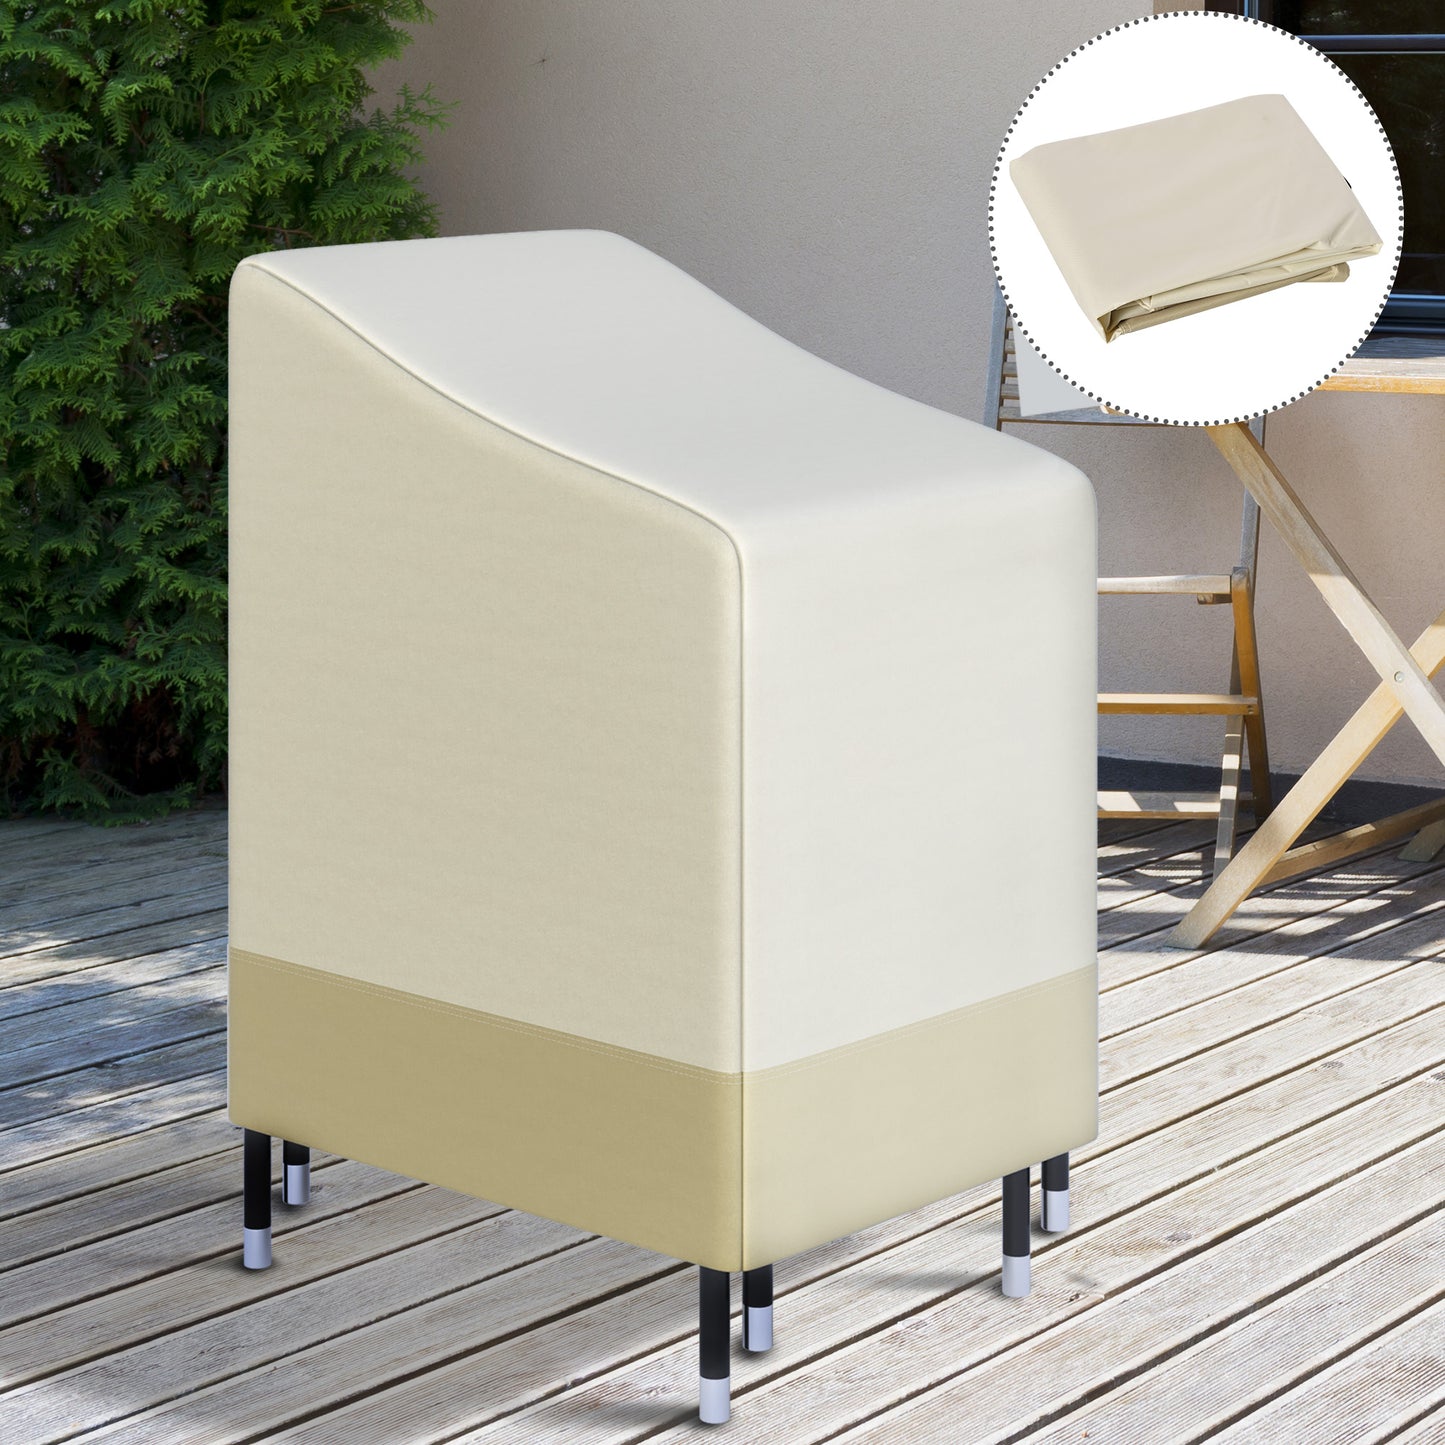 Outsunny Weatherproof Furniture Shield: 600D Oxford Fabric for Wicker Chairs, Patio Rattan Seating Protector, L70*W90*H115cm